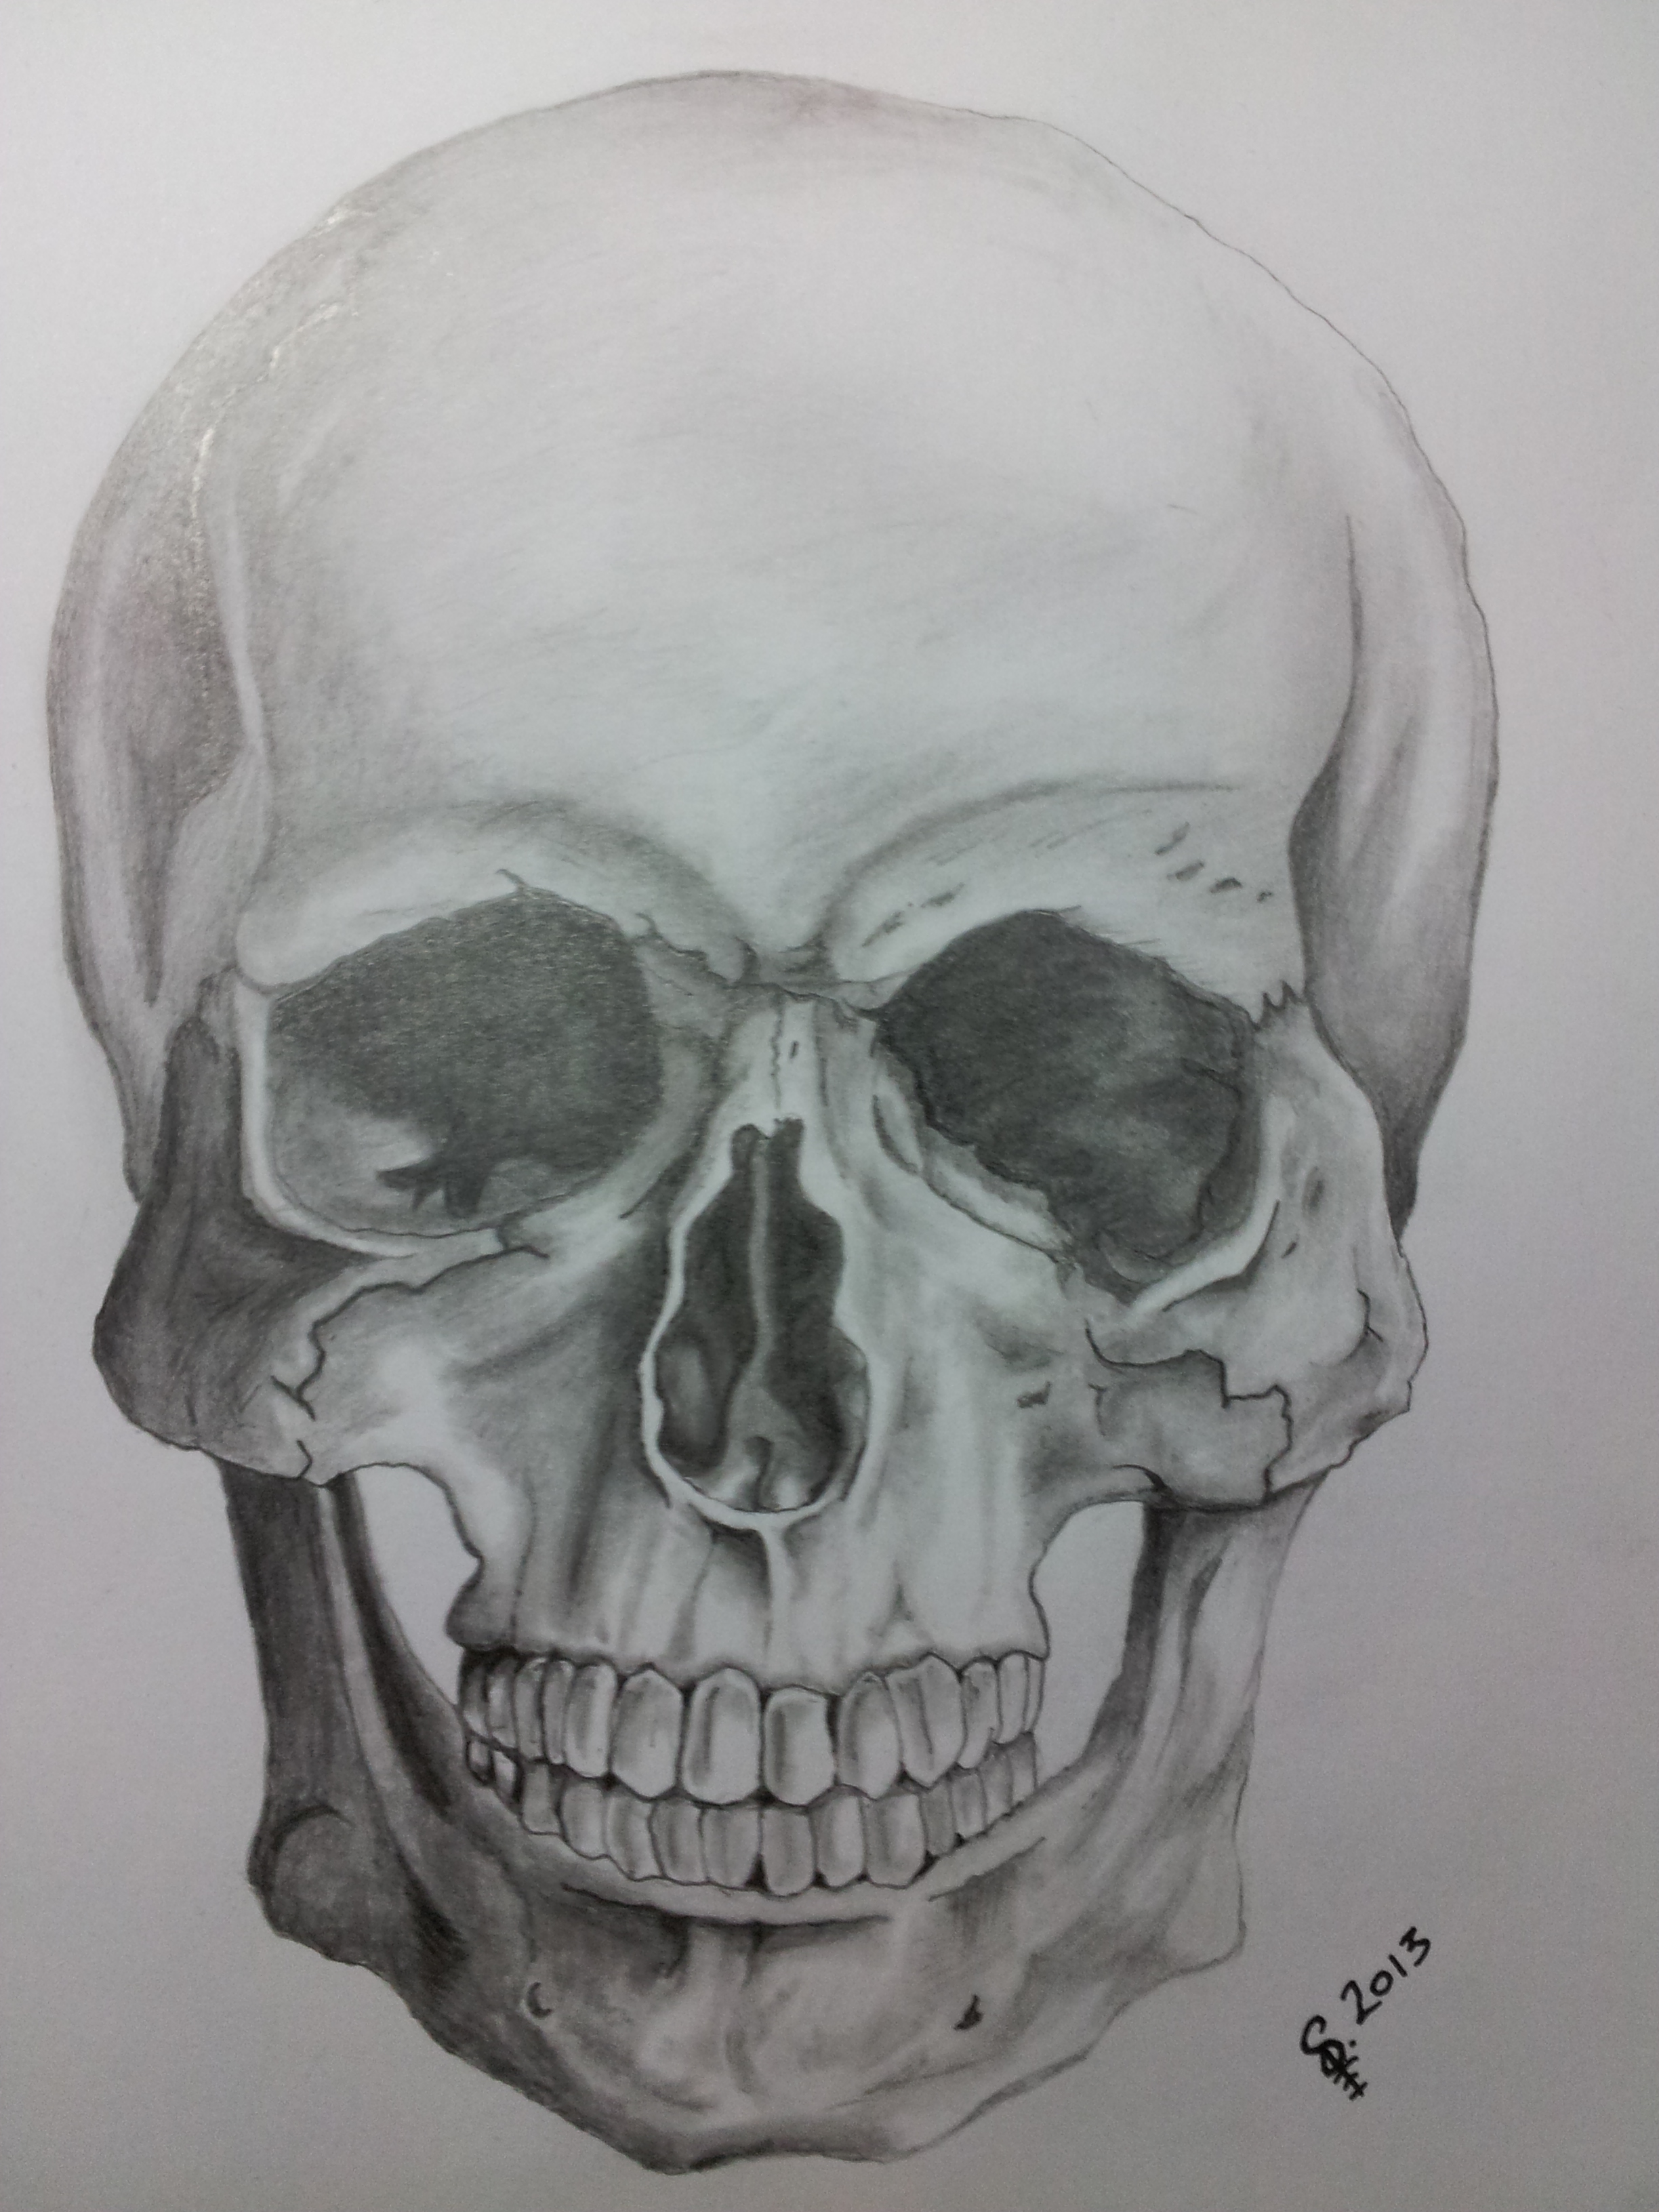 Skull pencil sketch by ItchyBear on DeviantArt